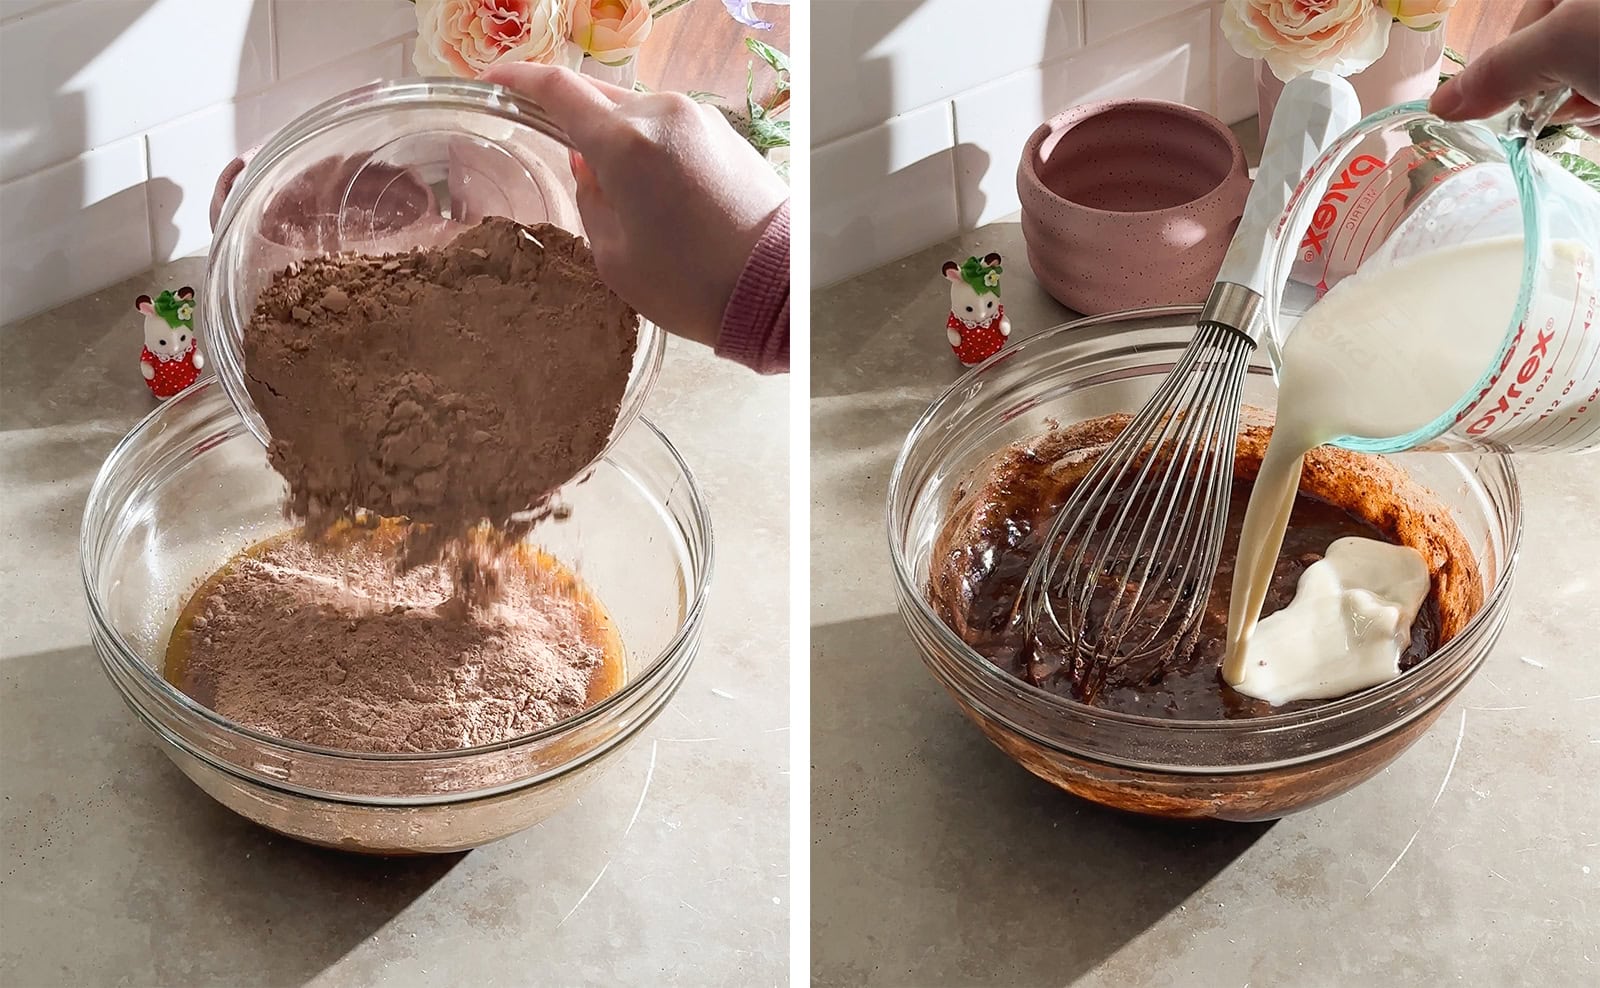 Left to right: pouring flour mixture into a mixing bowl of wet ingredients, pouring milk into a mixing bowl of chocolate cake batter.